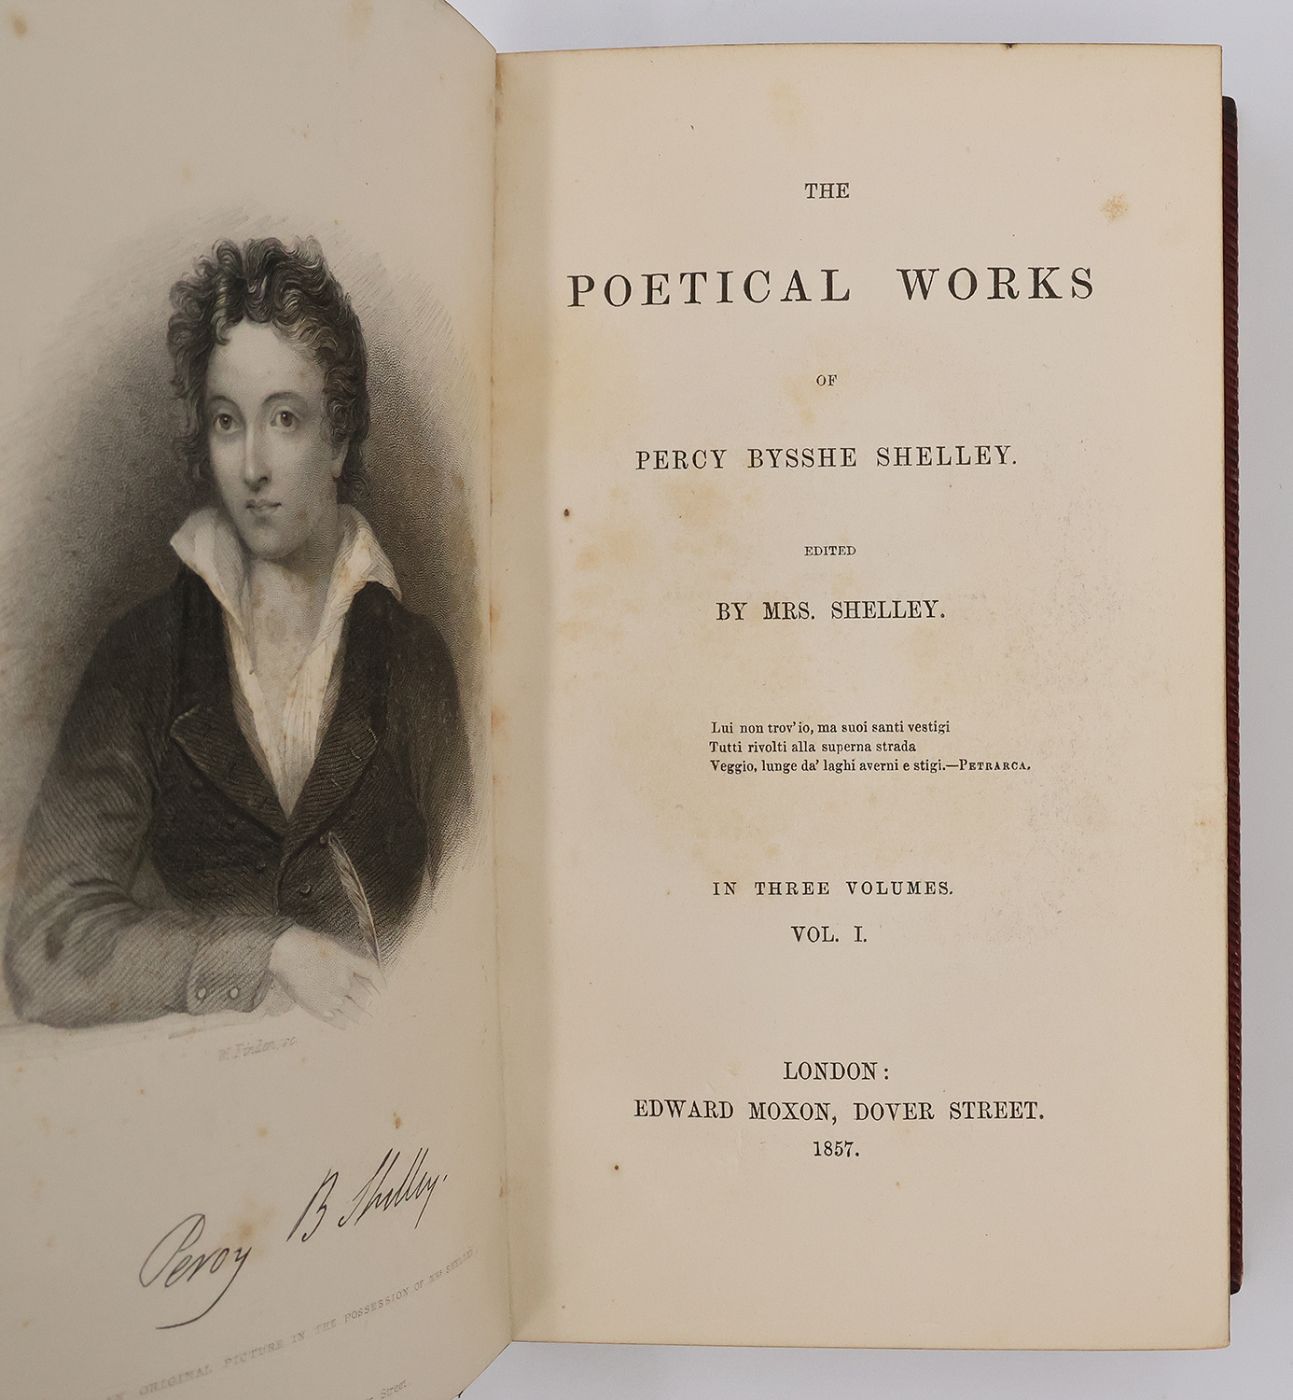 THE POETICAL WORKS OF PERCY BYSSHE SHELLEY -  image 5